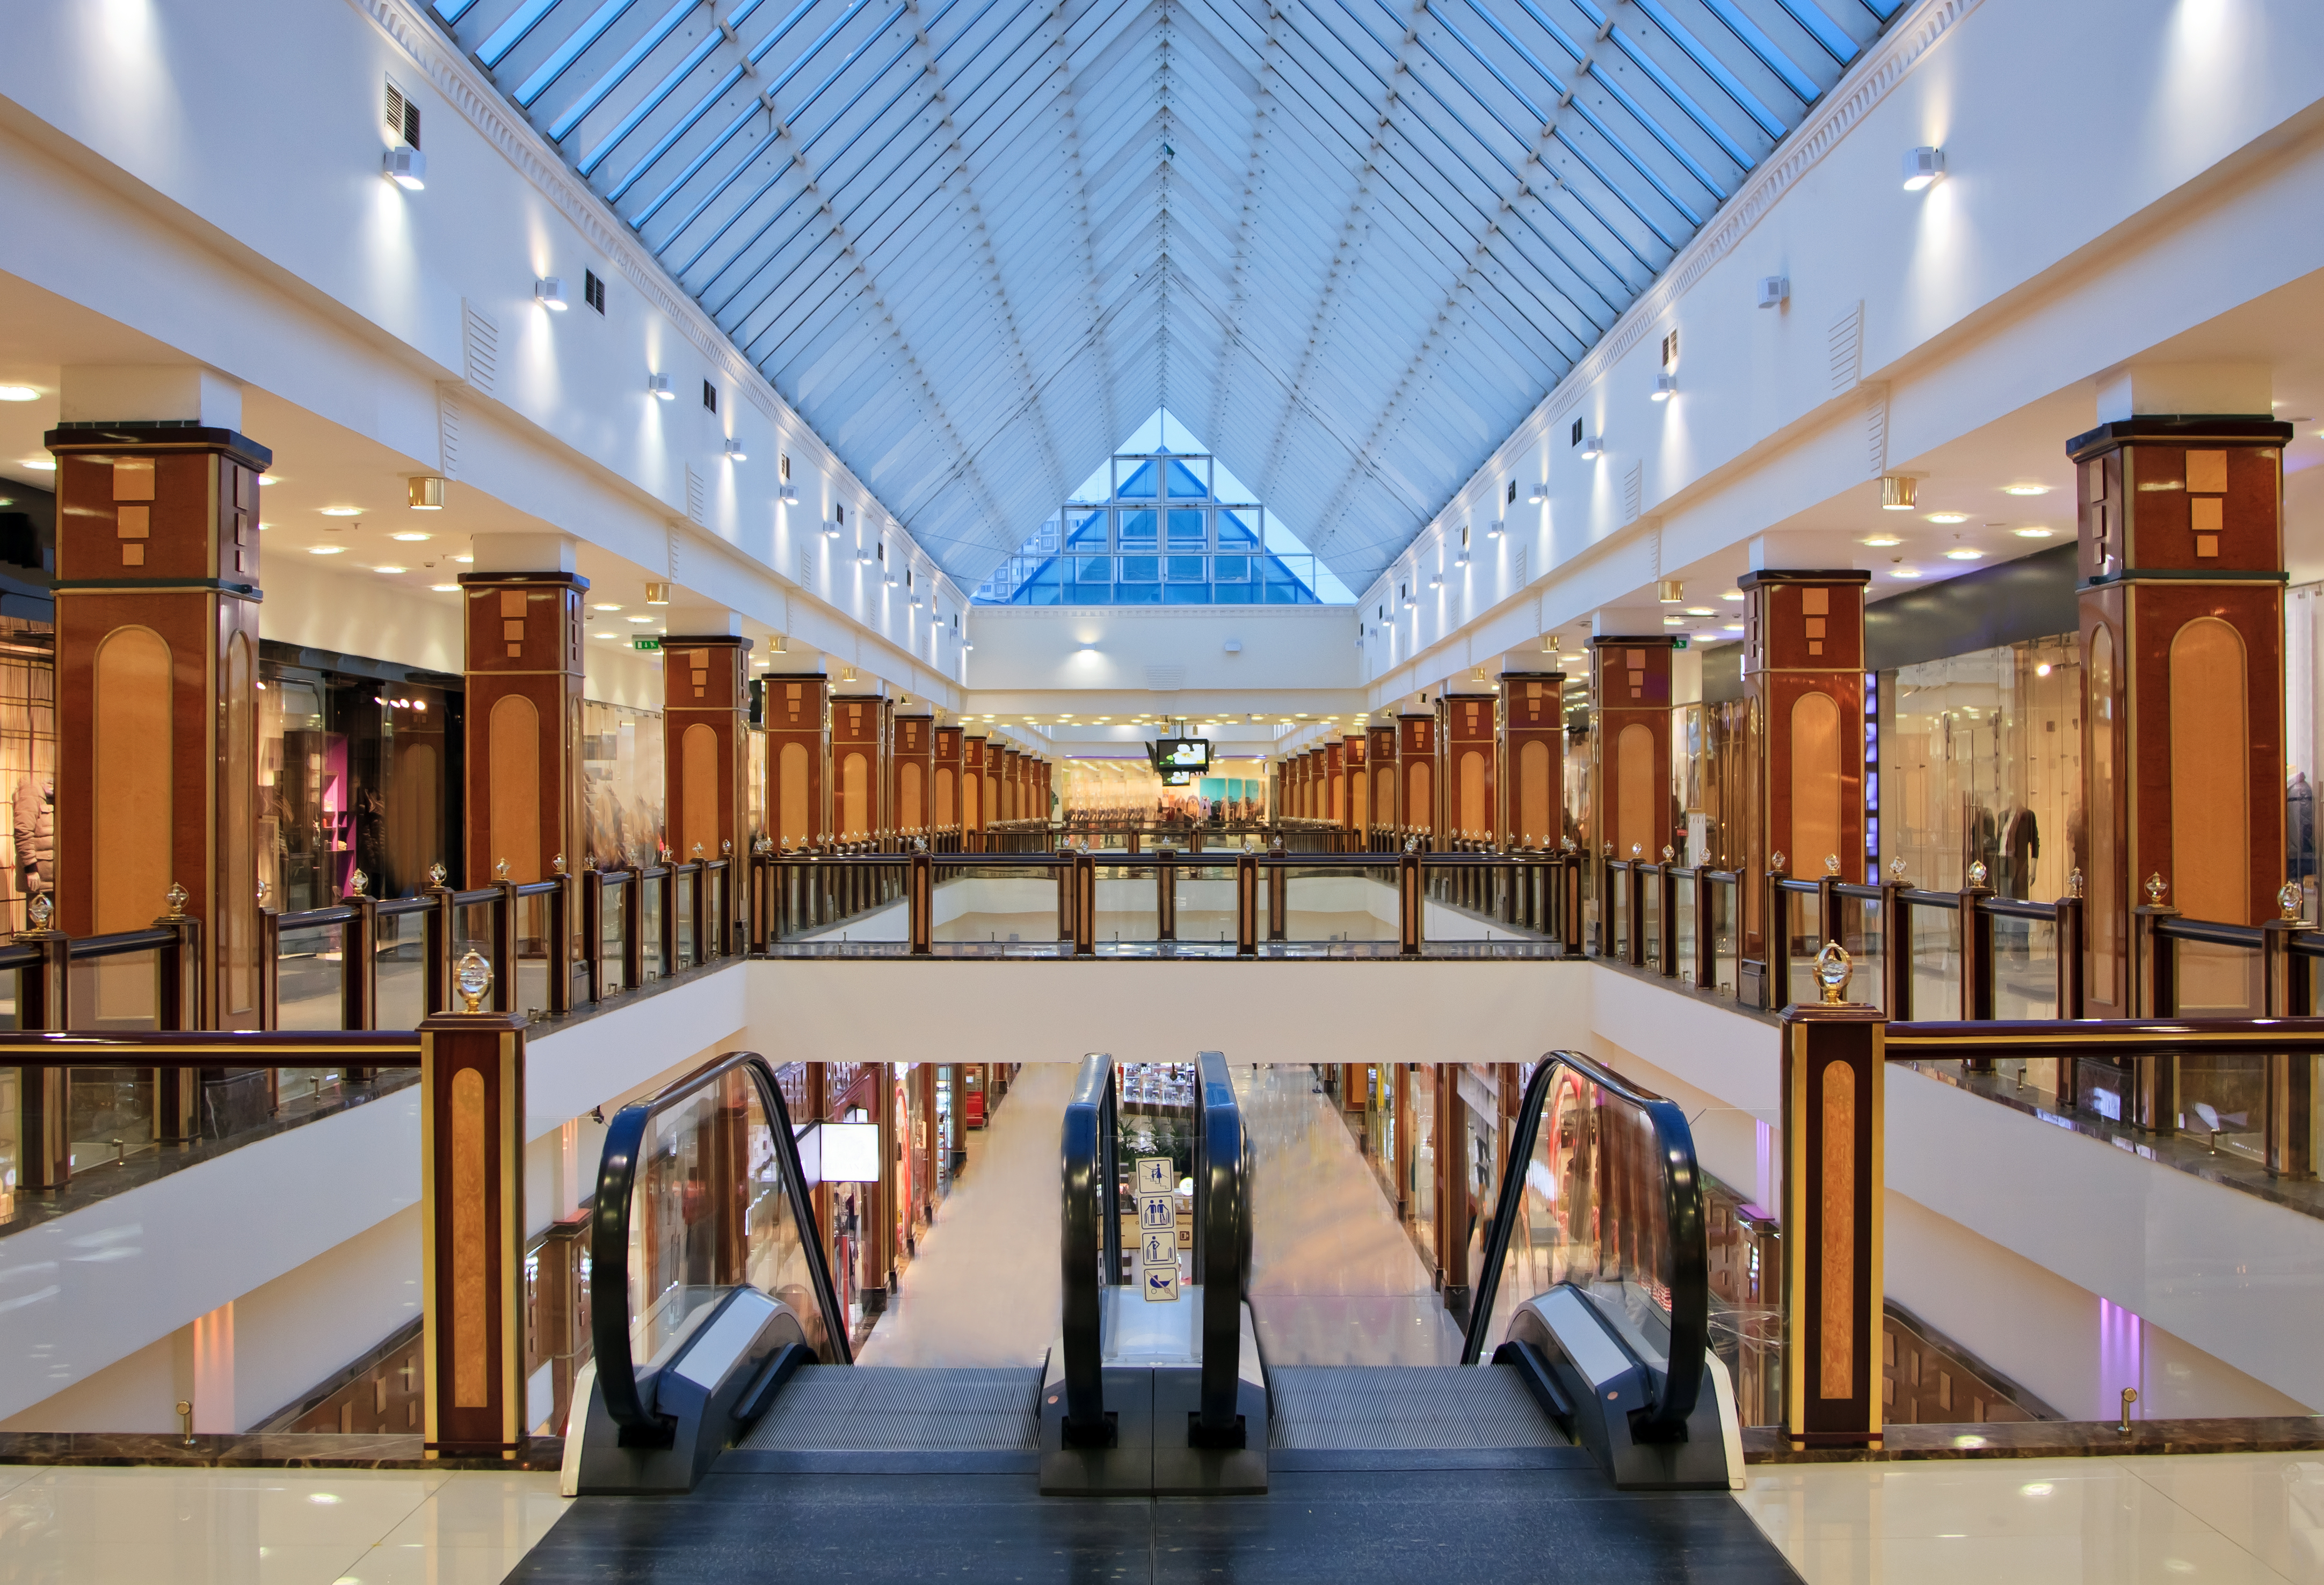 escalators inside a building with a glass roof